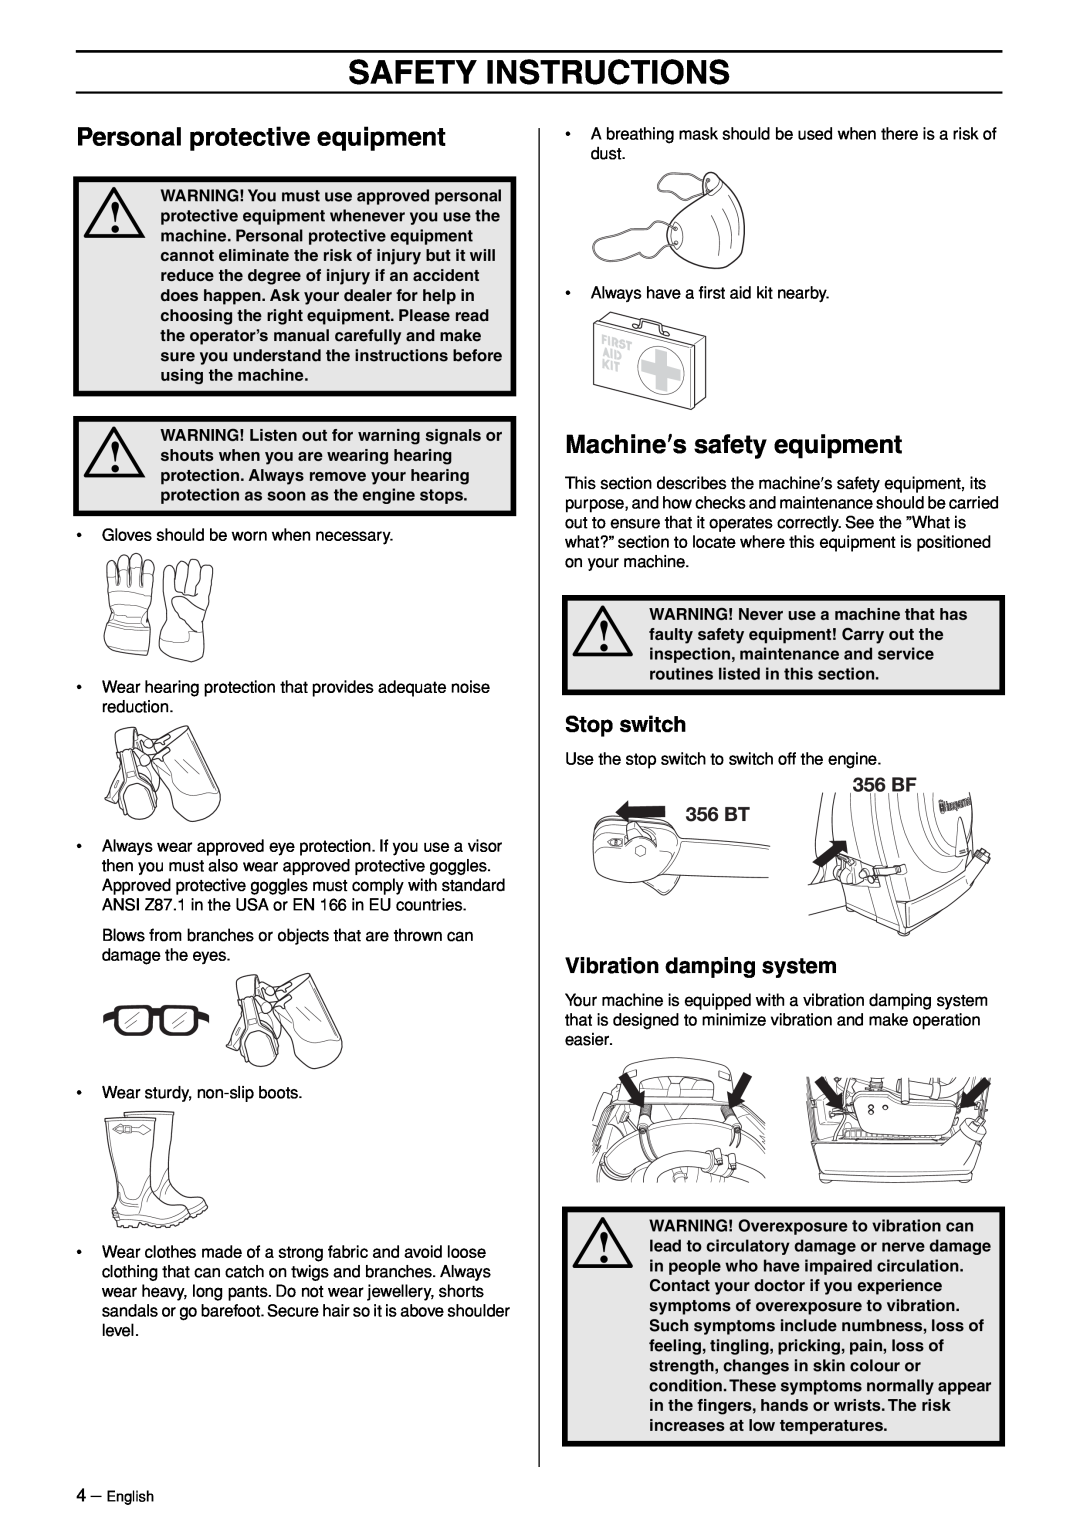 Husqvarna 356BT manual Safety Instructions, Personal protective equipment, Machine′s safety equipment, Stop switch 